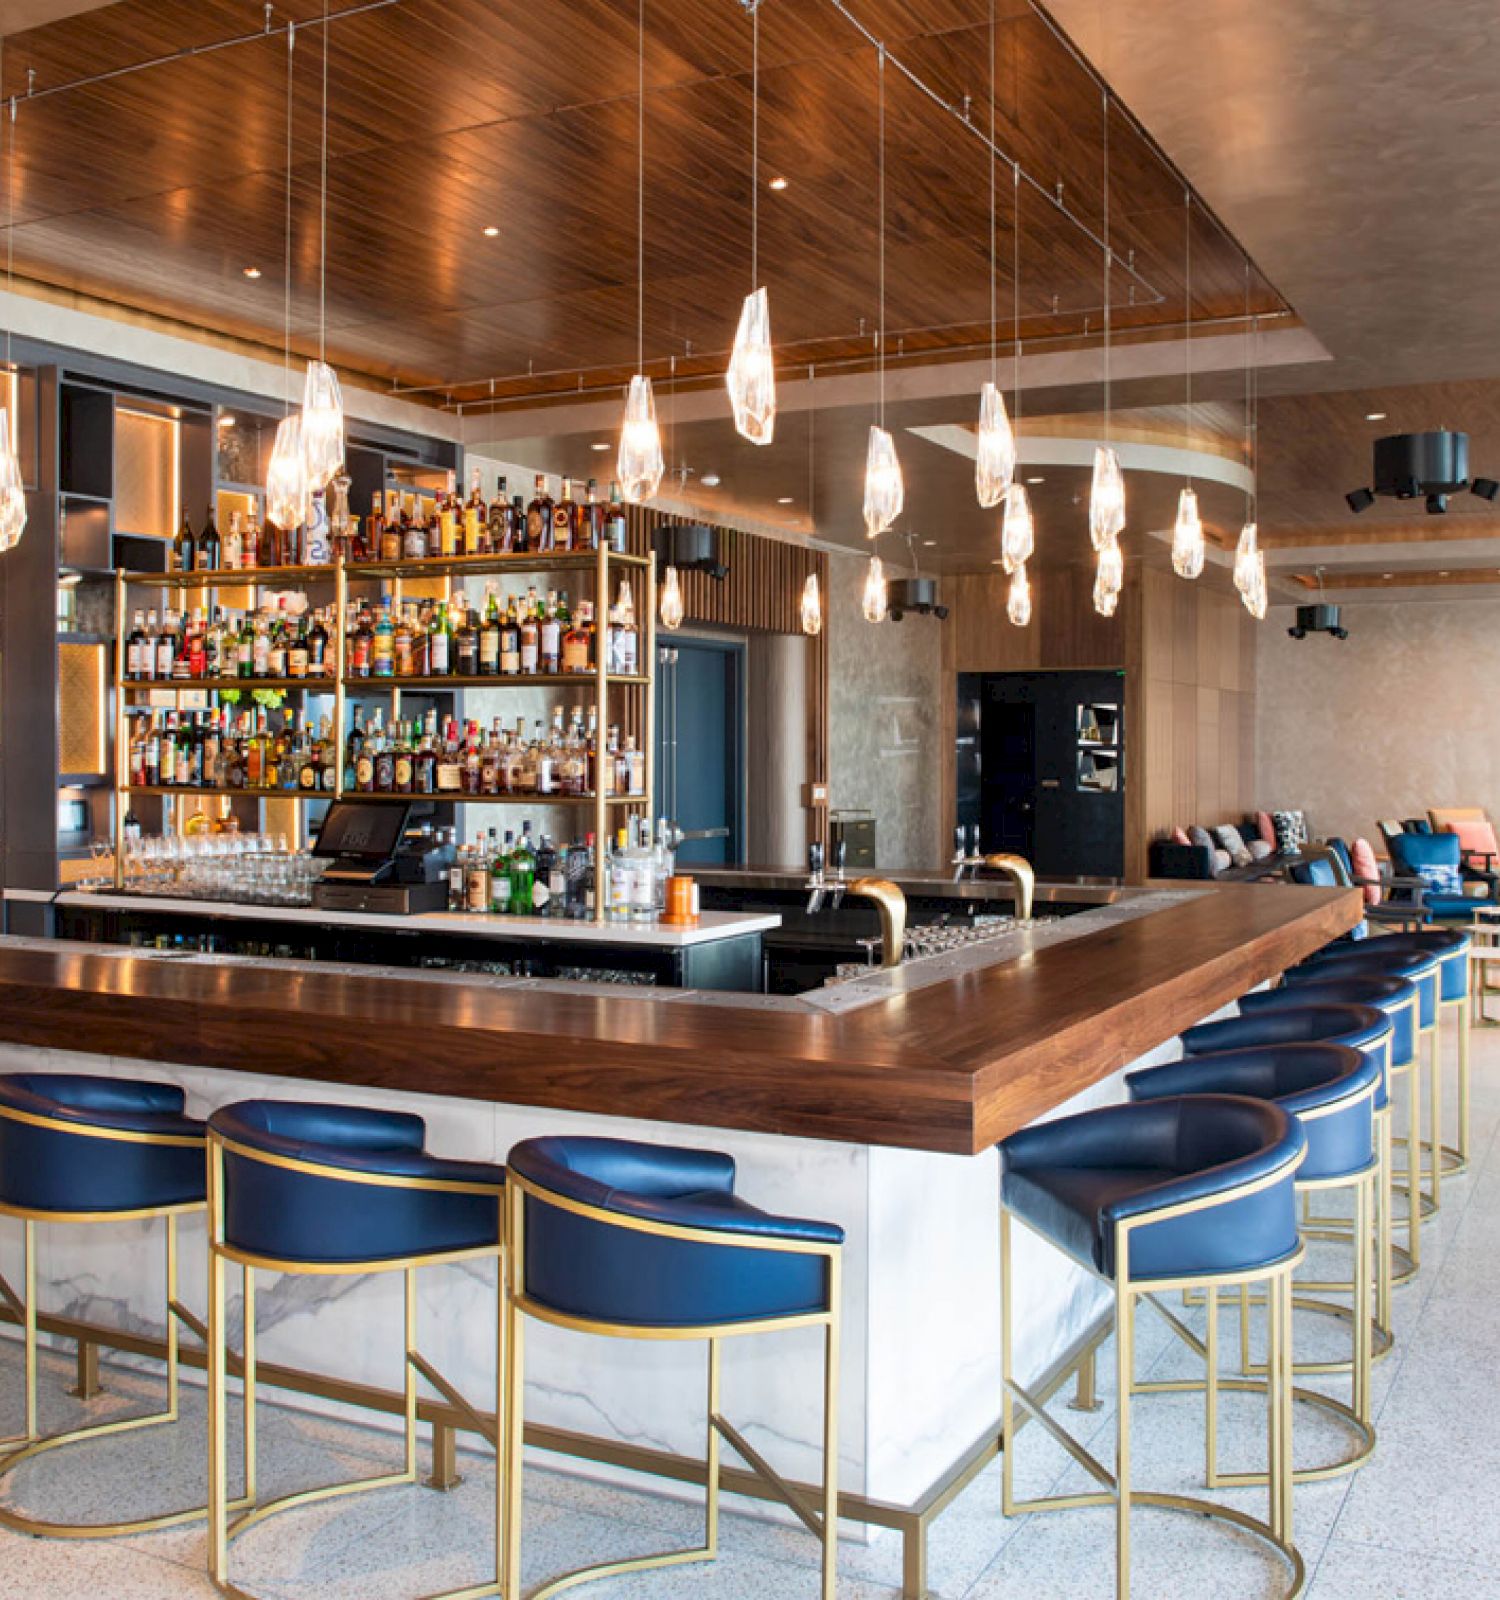 A modern bar with blue and gold bar stools, a stocked liquor shelf, hanging lights, and seating area in the background.